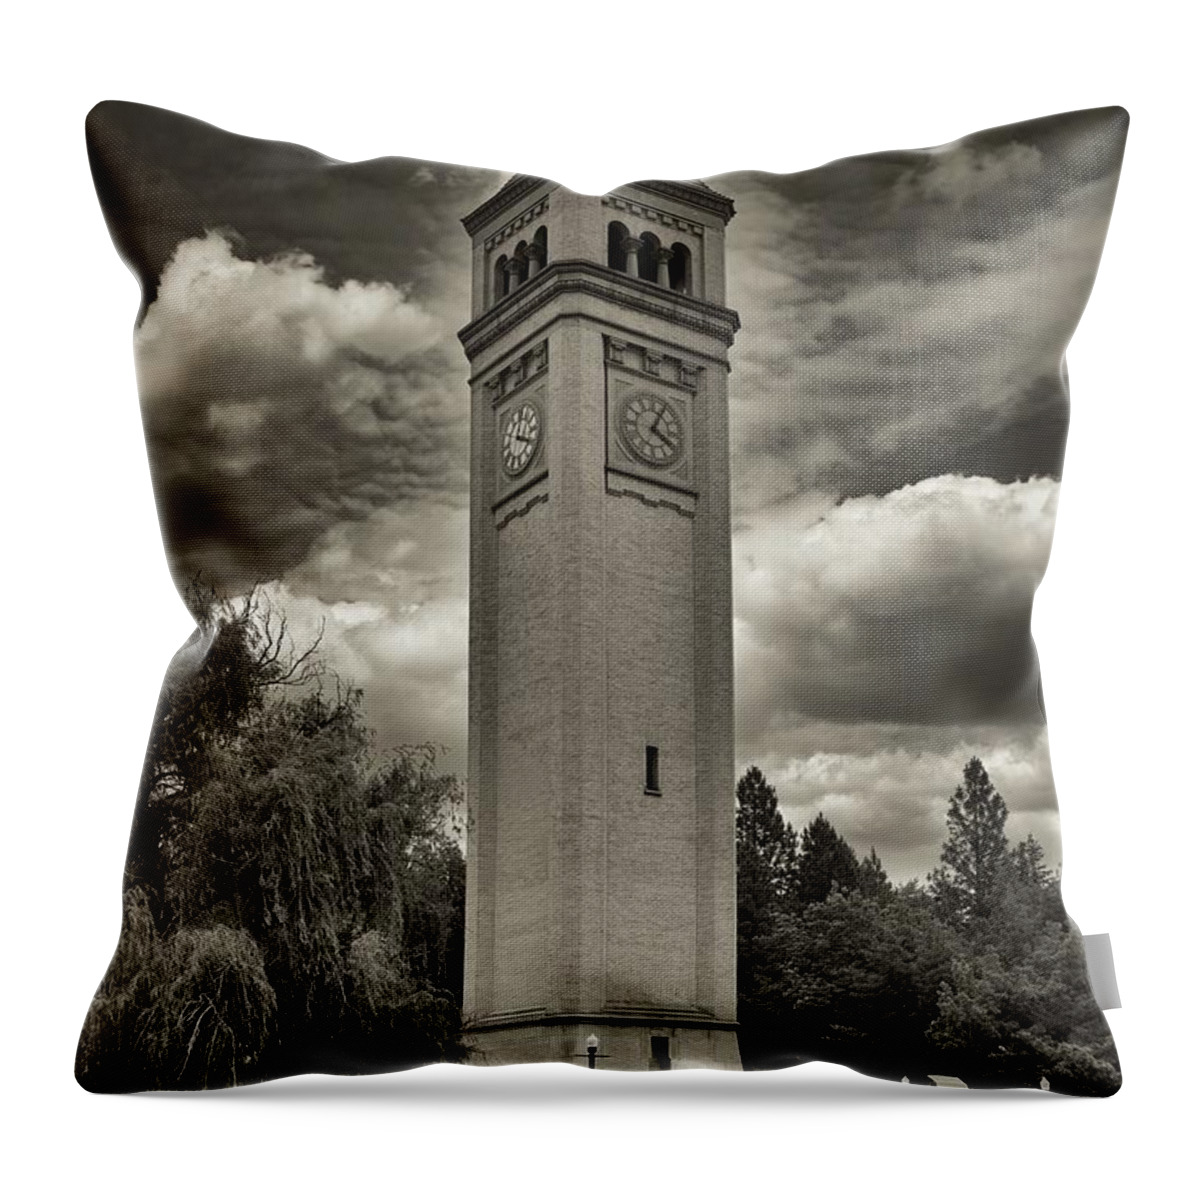 Spokane Throw Pillow featuring the photograph The Havermale Island Clocktower #1 by Mountain Dreams